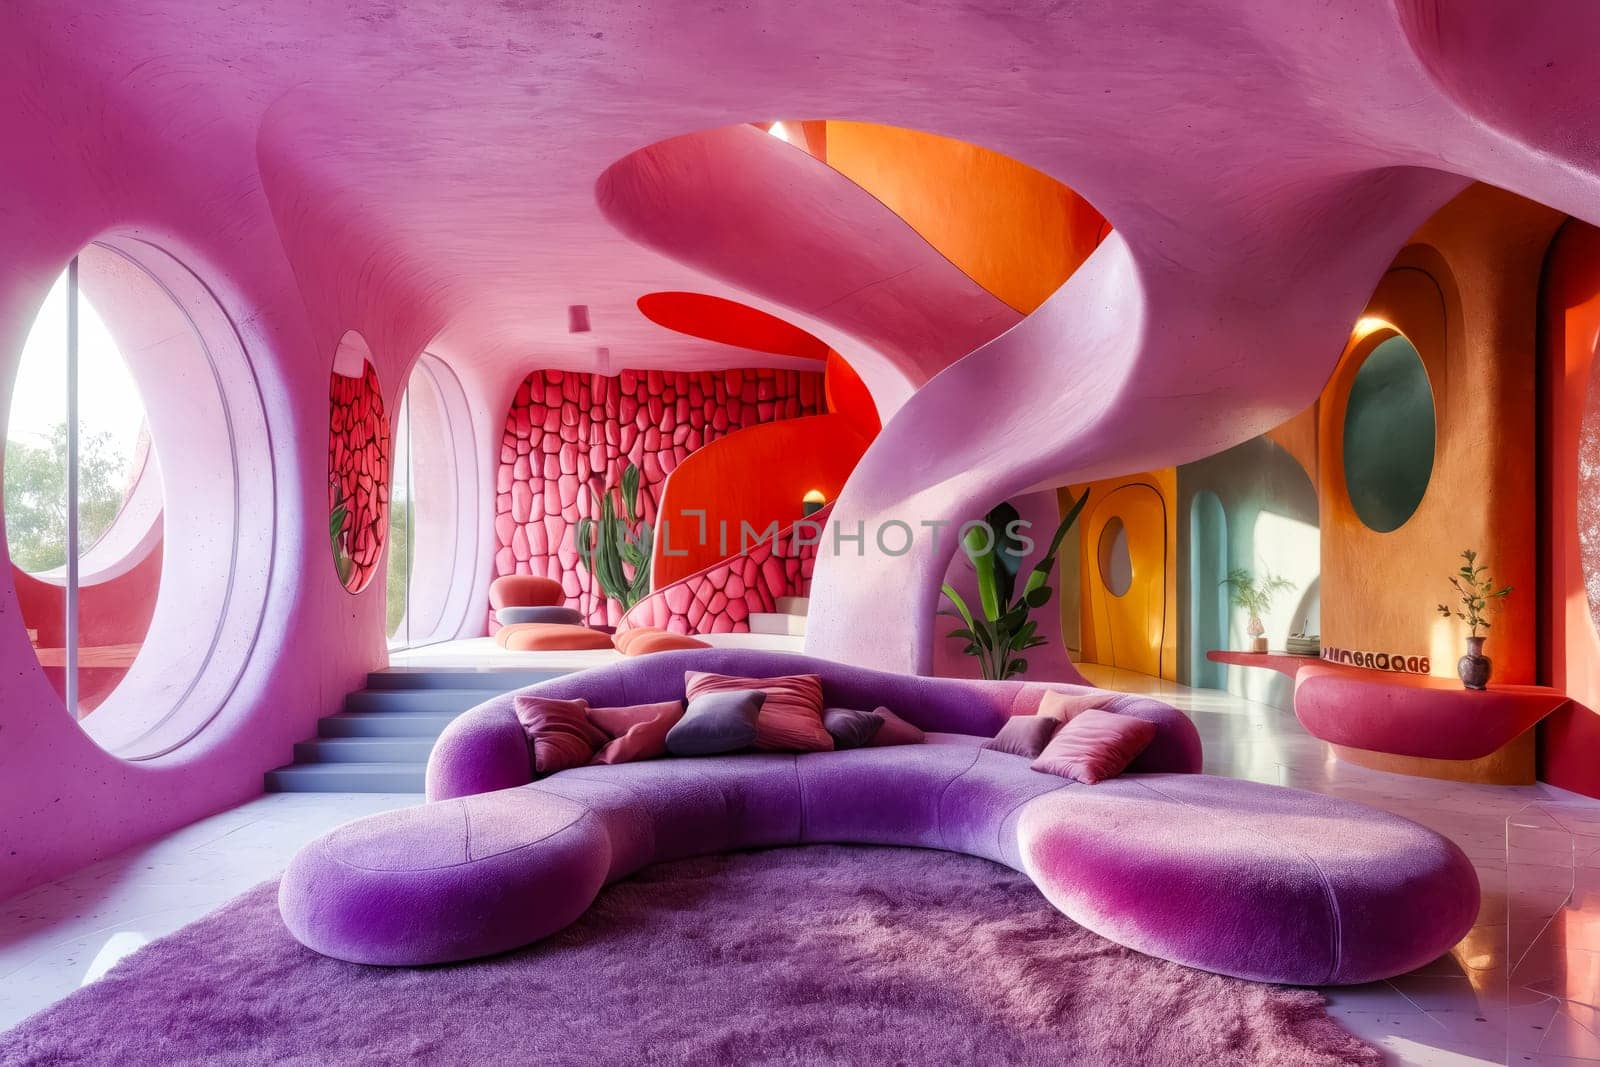 A pink and orange room with a pink couch and a pink rug. The room has a pink and orange color scheme and has a modern and playful vibe. Generative AI